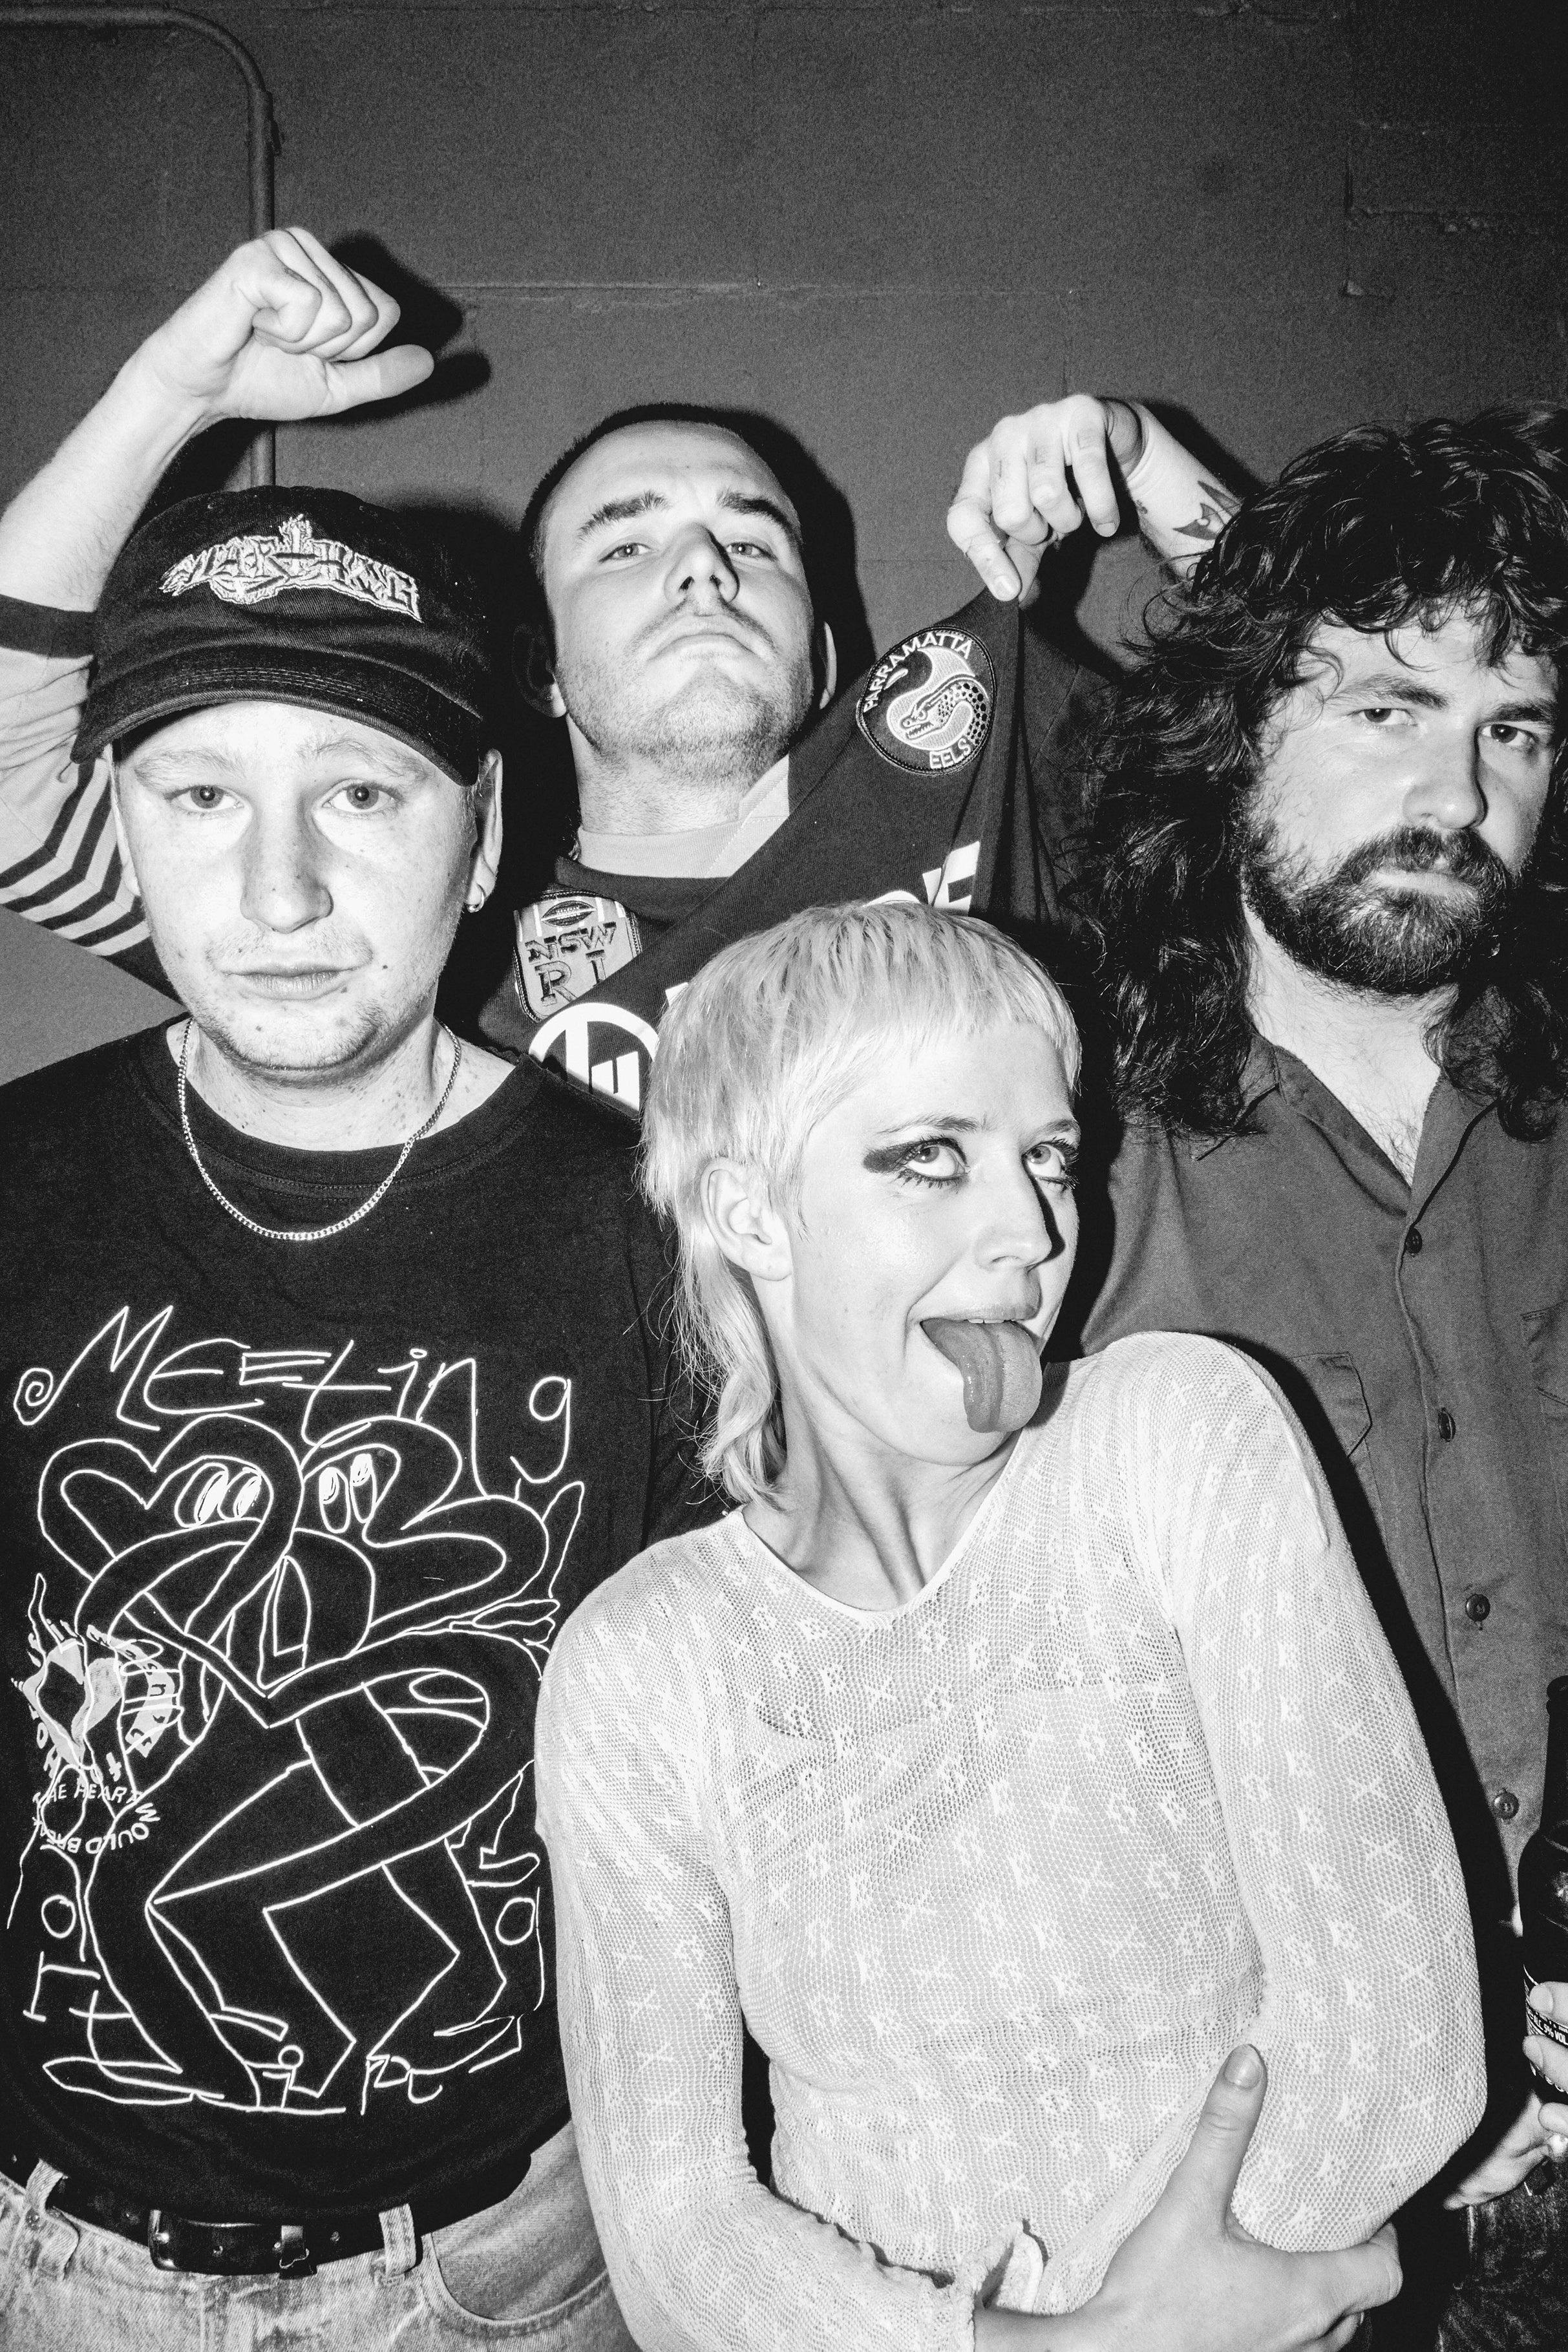 Amyl and the Sniffers, Die Spitz at Tioga Sequoia Brewery - Fresno, CA 93721